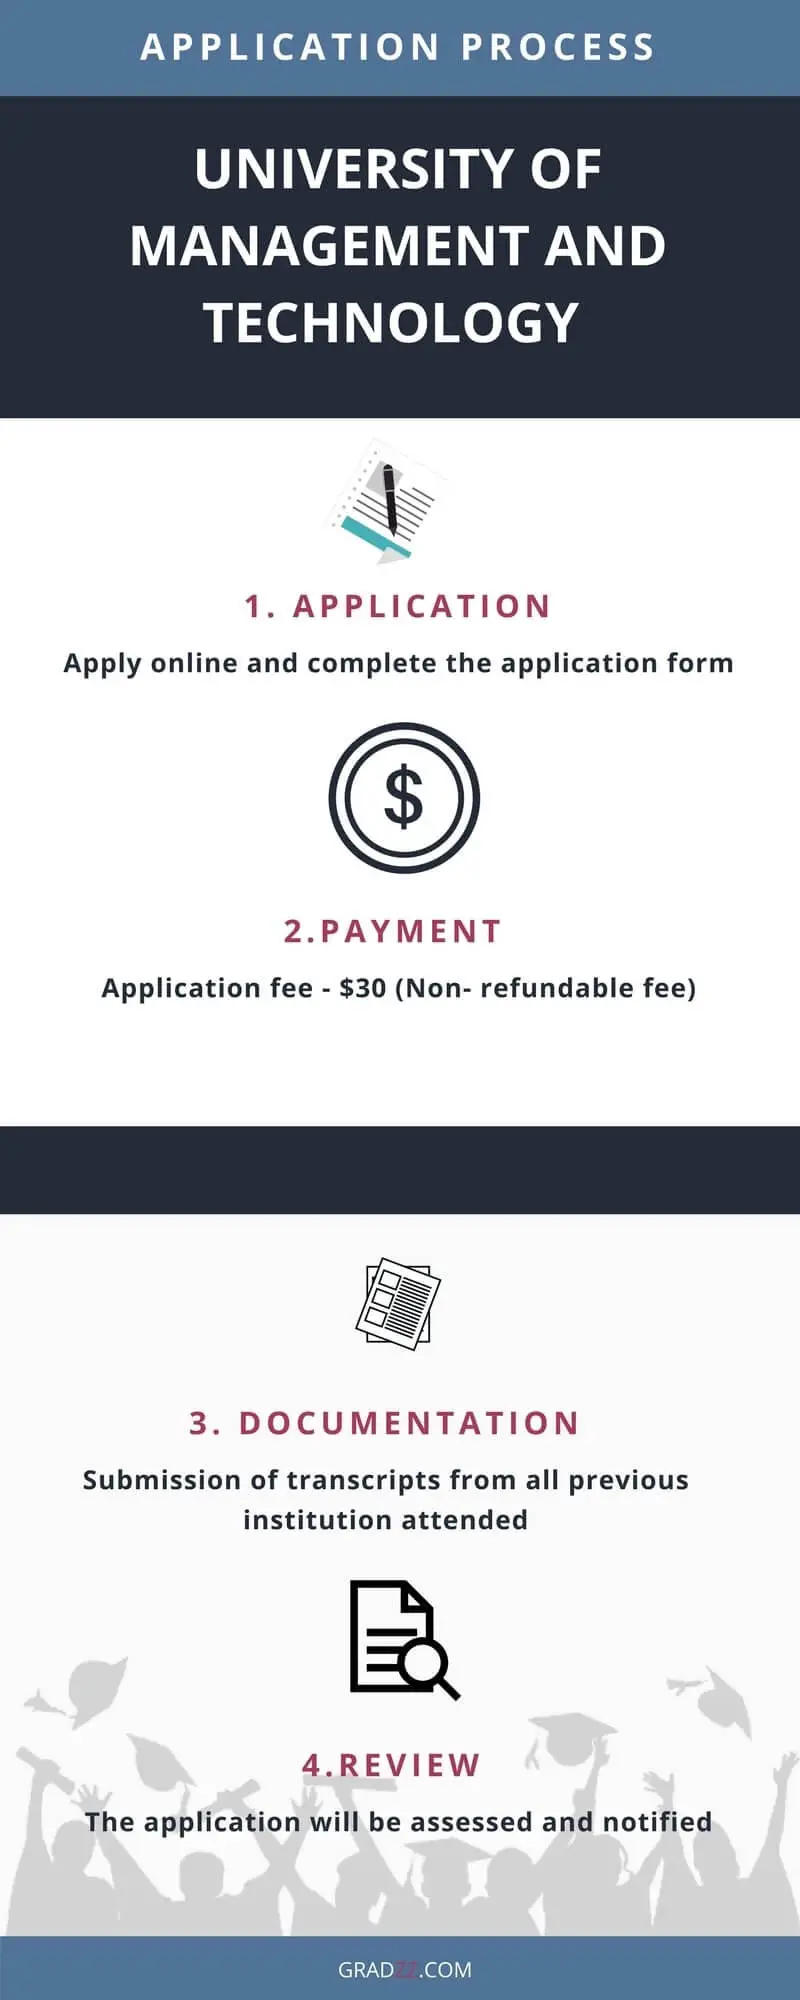 University of Management and Technology Application Process